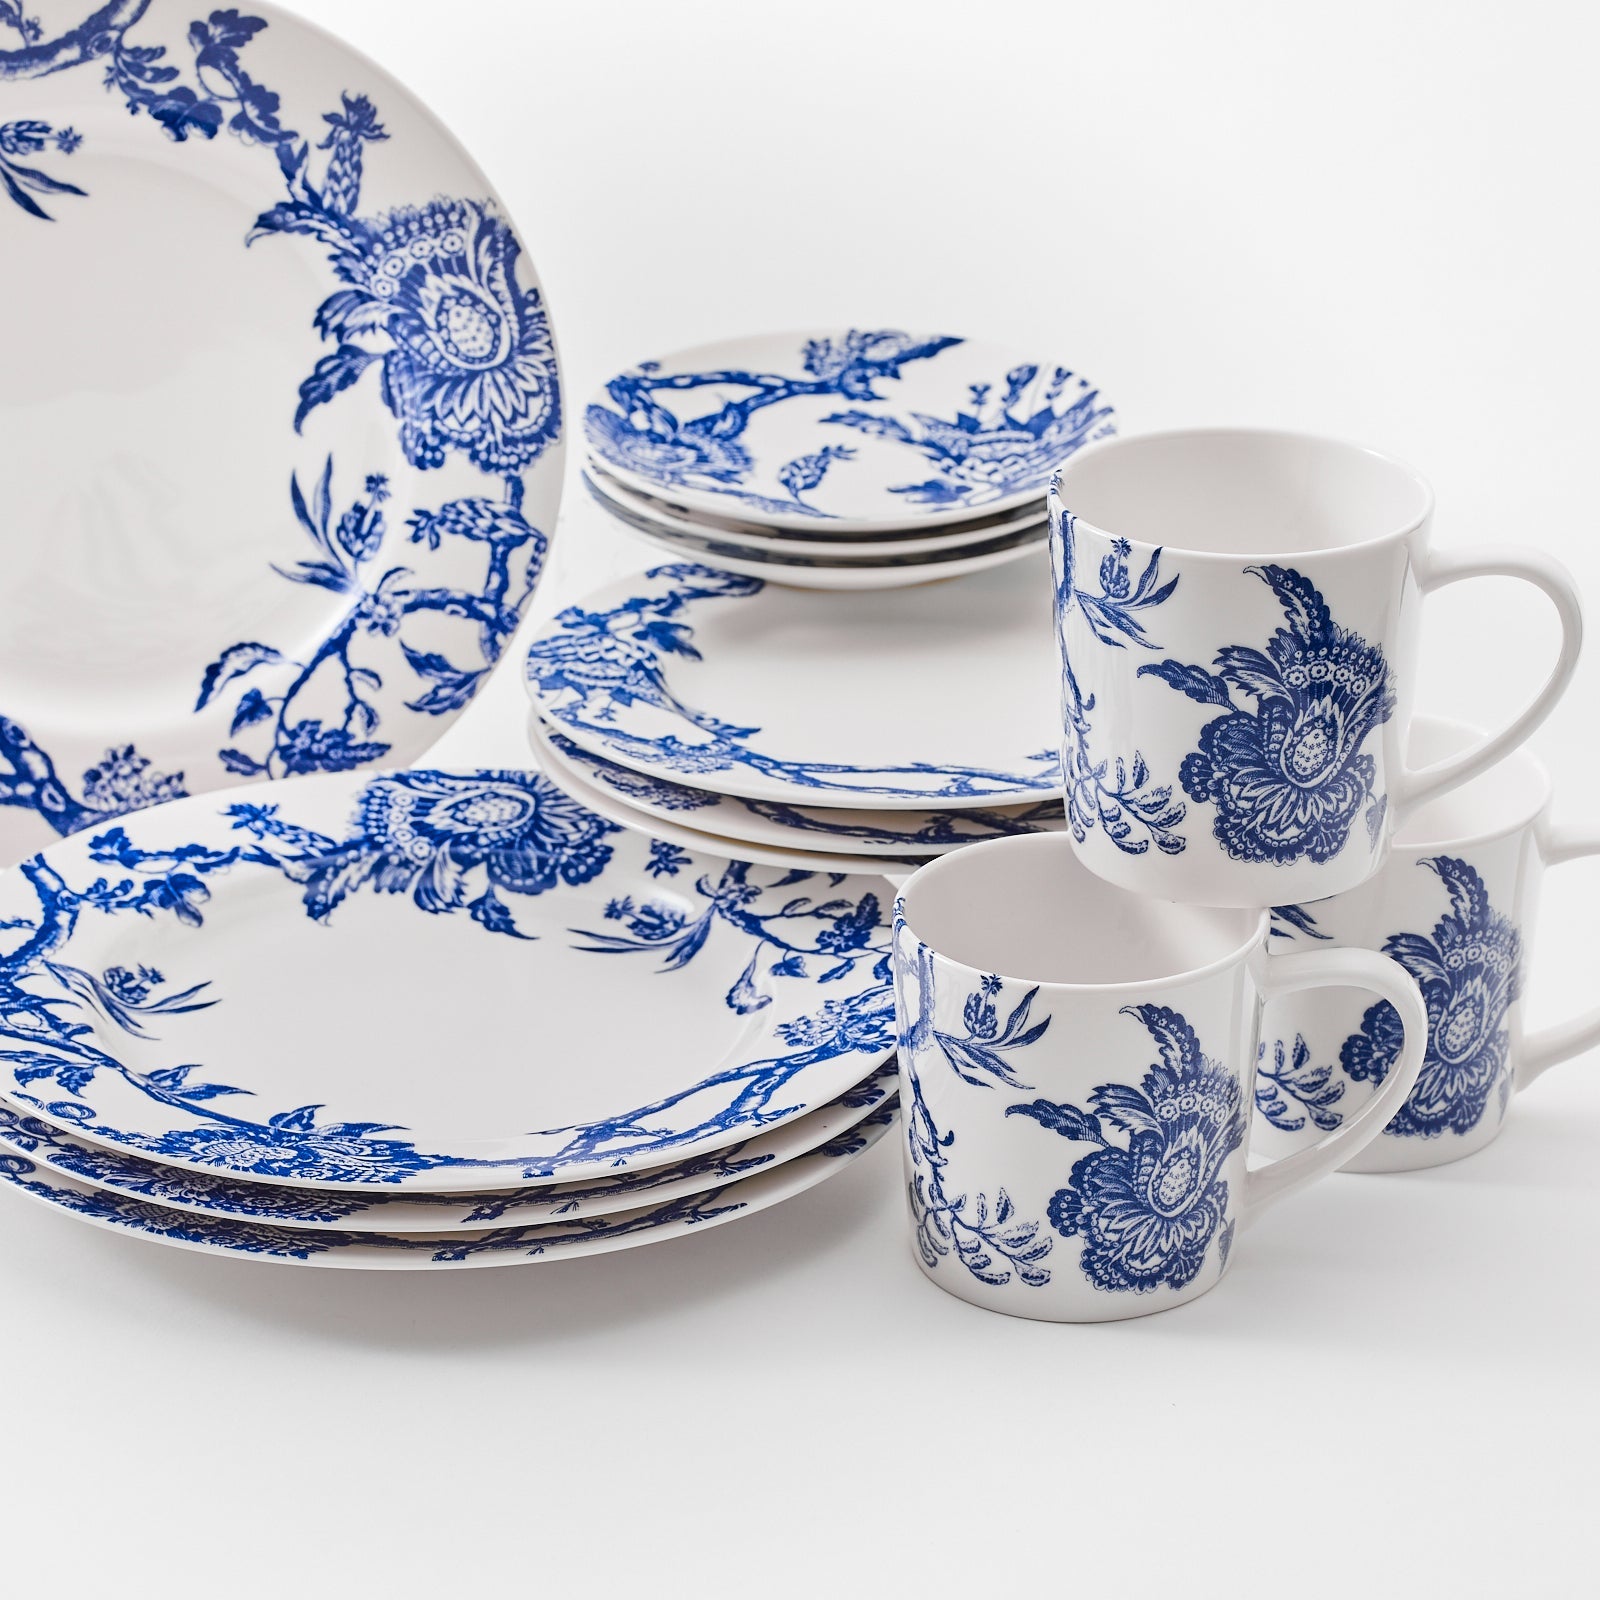 Arcadia Blue 16 piece dinnerware set. Table for four includs 4 dinner plates, 4 salad plates, 4 canape plates, and four mugs, in high-fired porcelain from Caskata. Dishwasher and Microwave Safe.